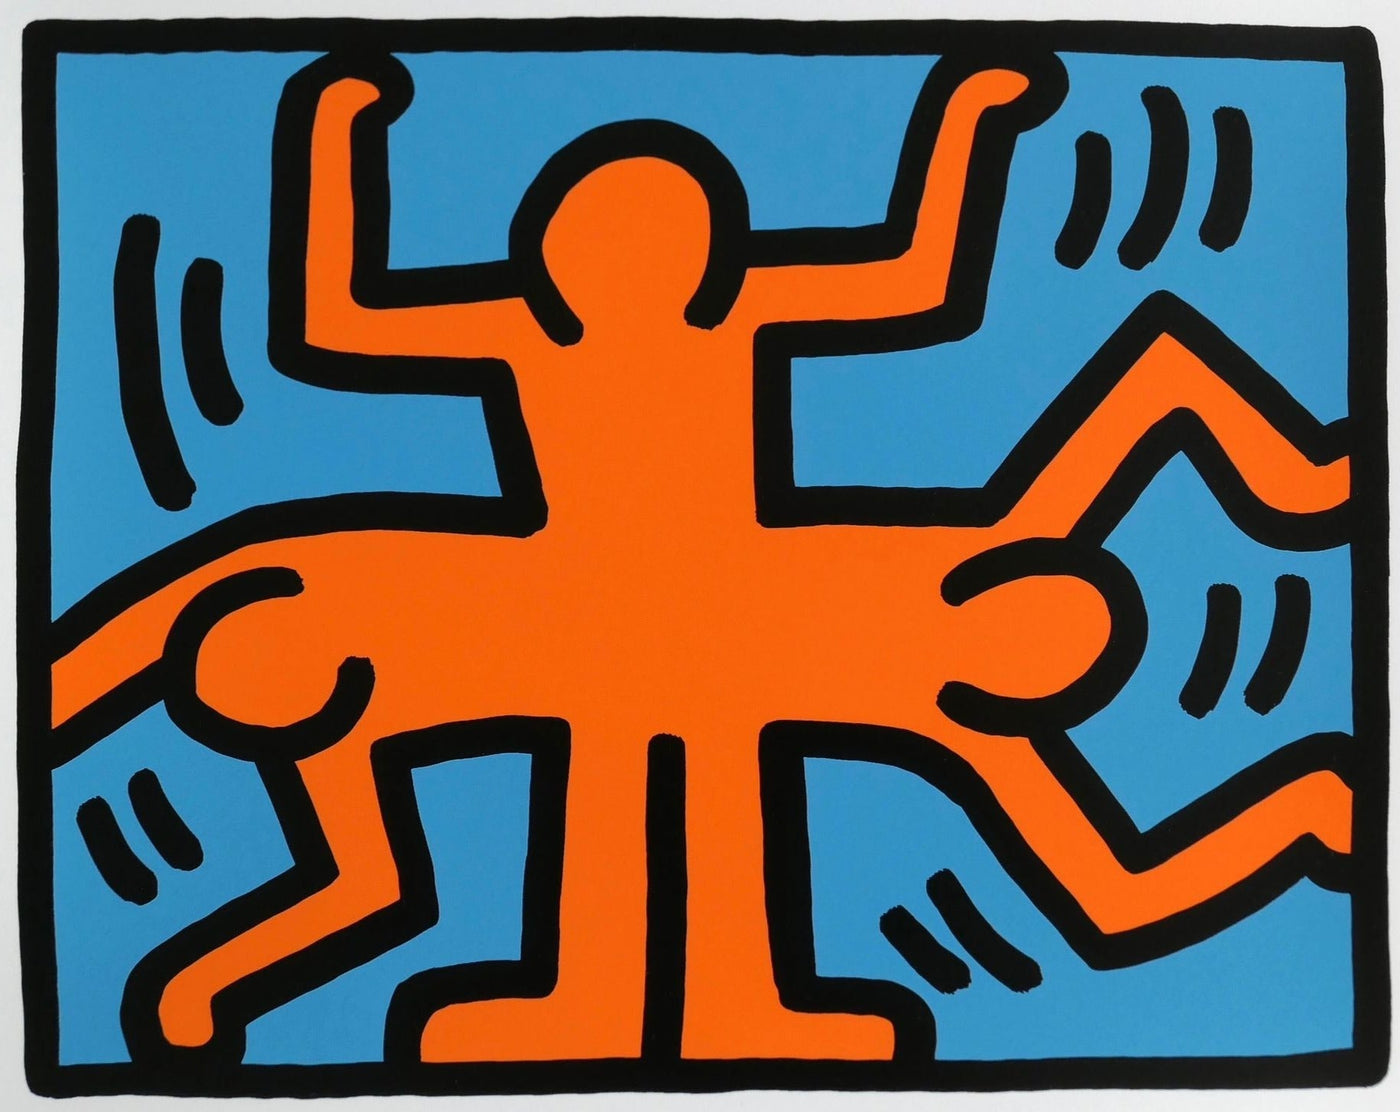 Keith Haring Pop Shop VI Plate 4 (L. PP. 150-51) 1989